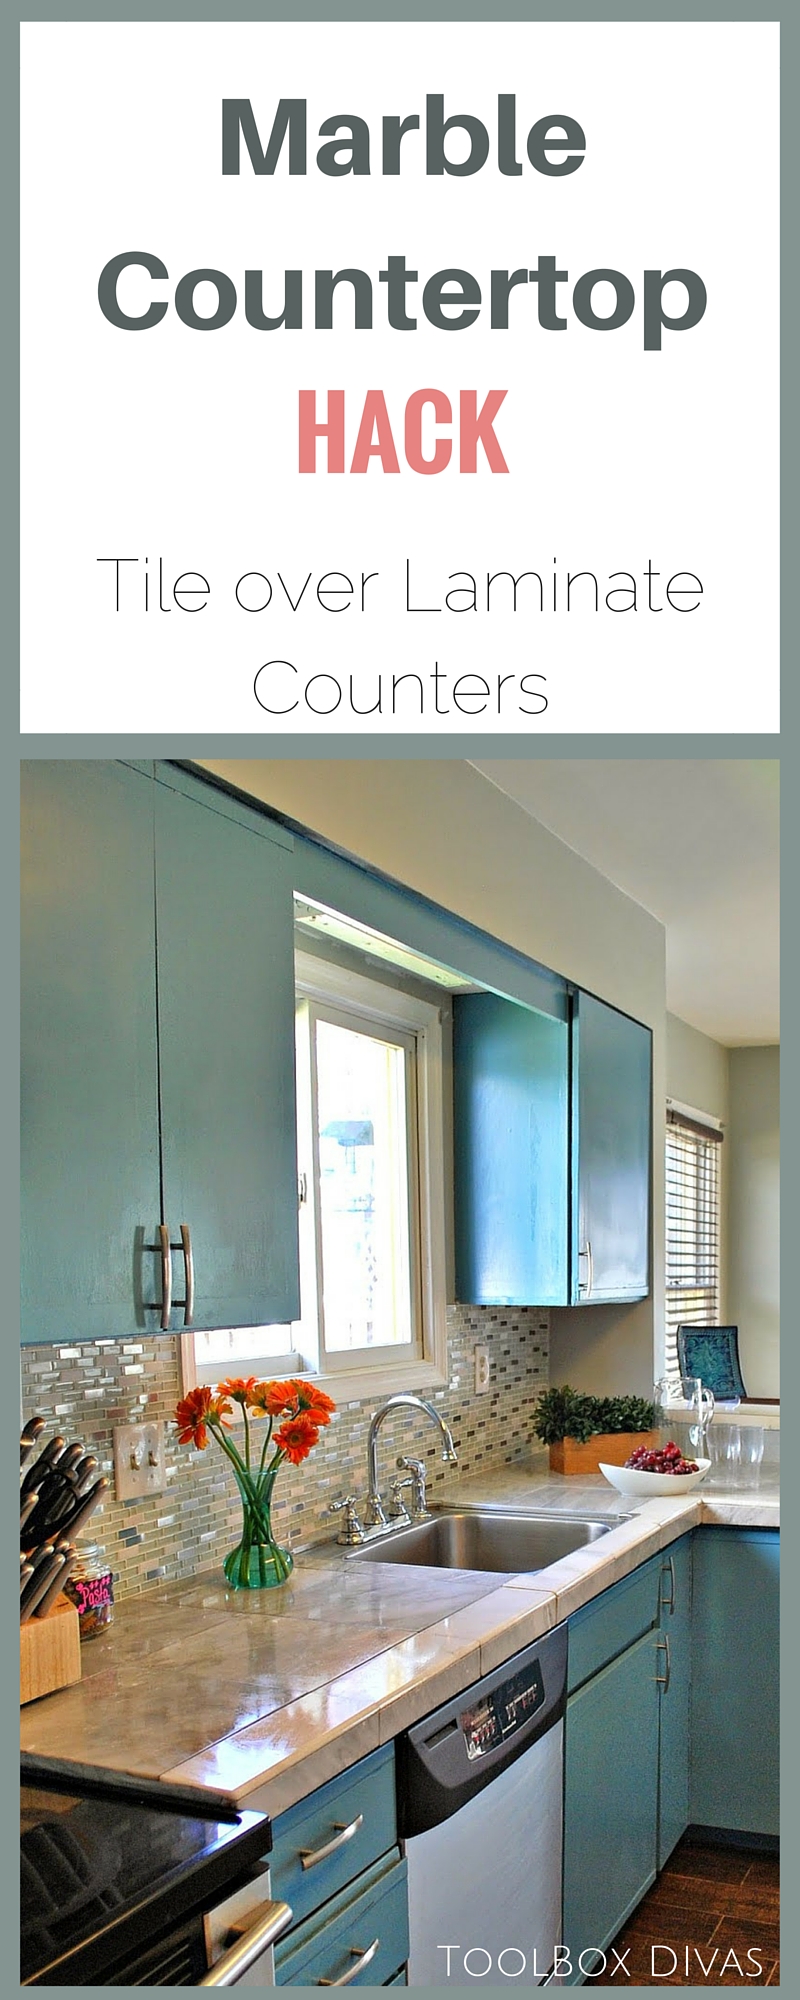 Tile Over Laminate Countertops, How To Tile Existing Countertops